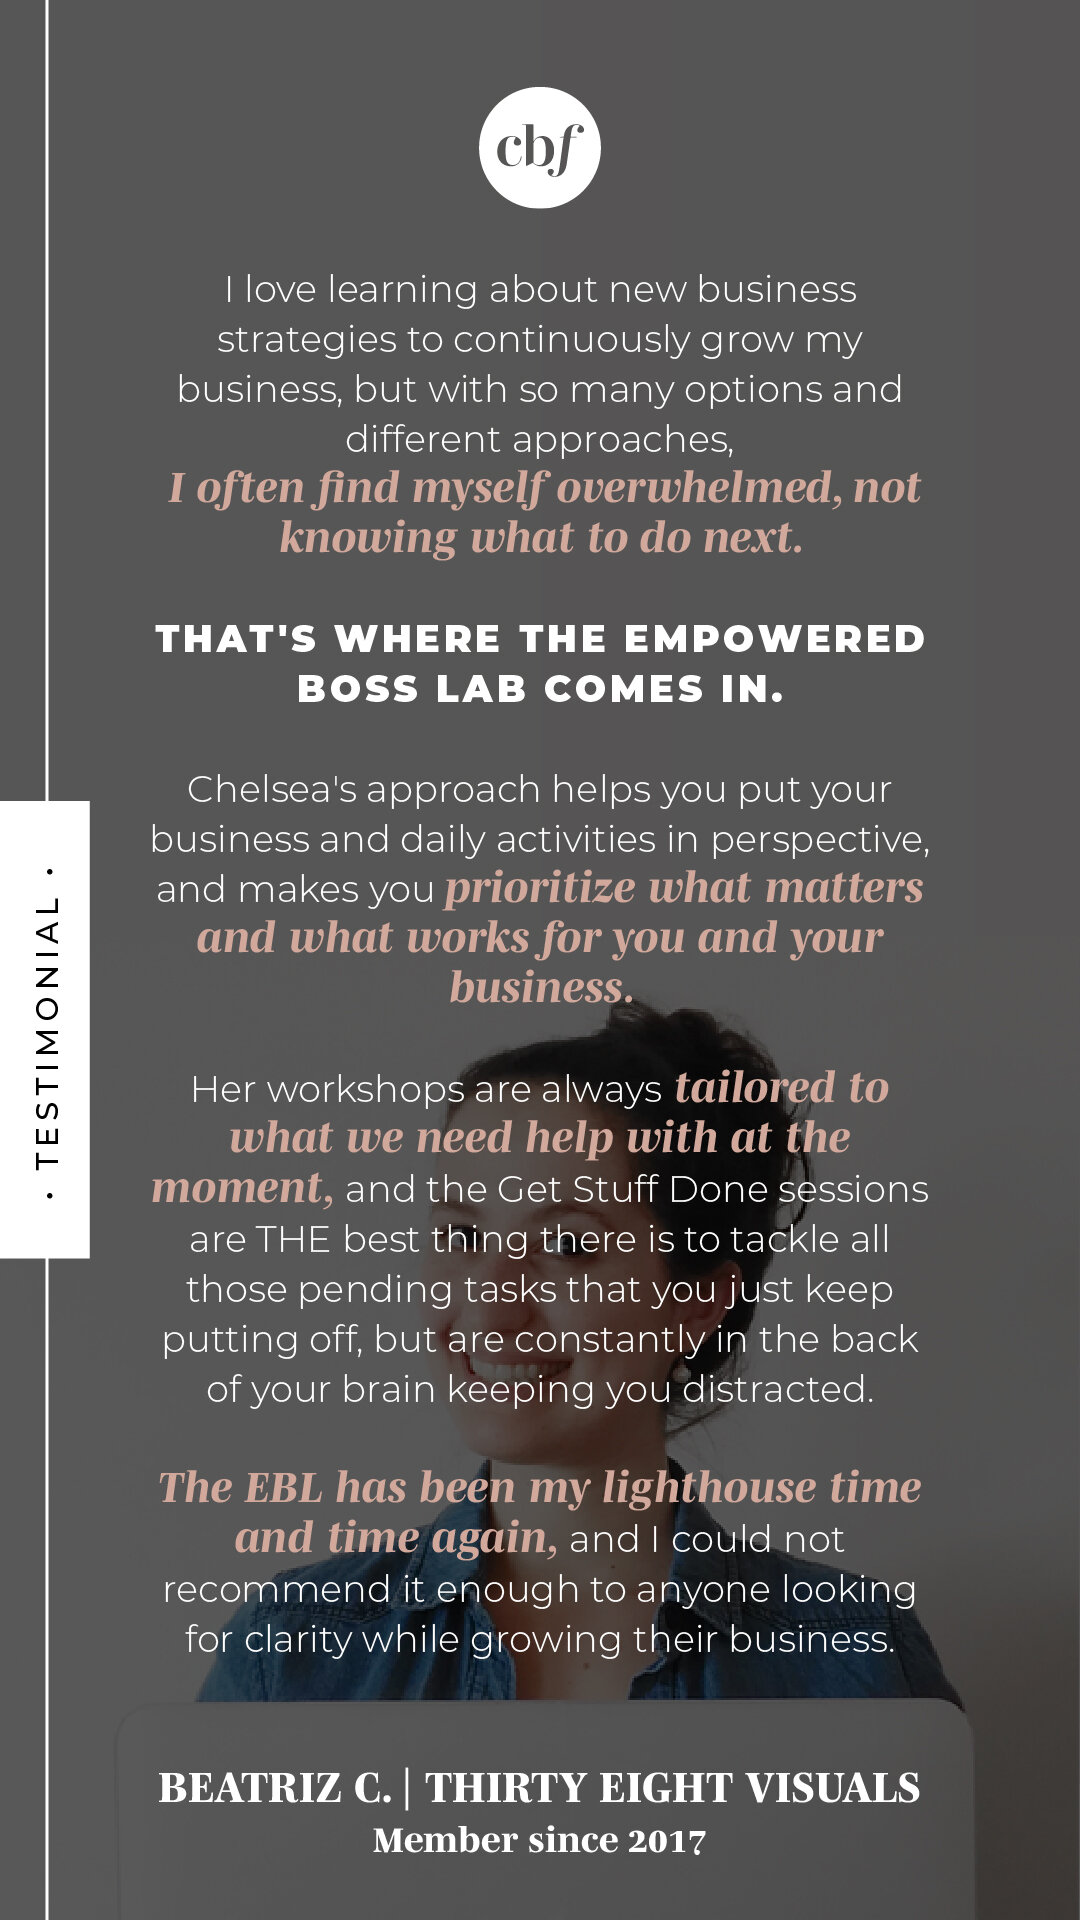 The Empowered Boss Lab by Chelsea B Foster | Testimonial from Beatriz C. of Thirty Eight Visuals, member since 2018